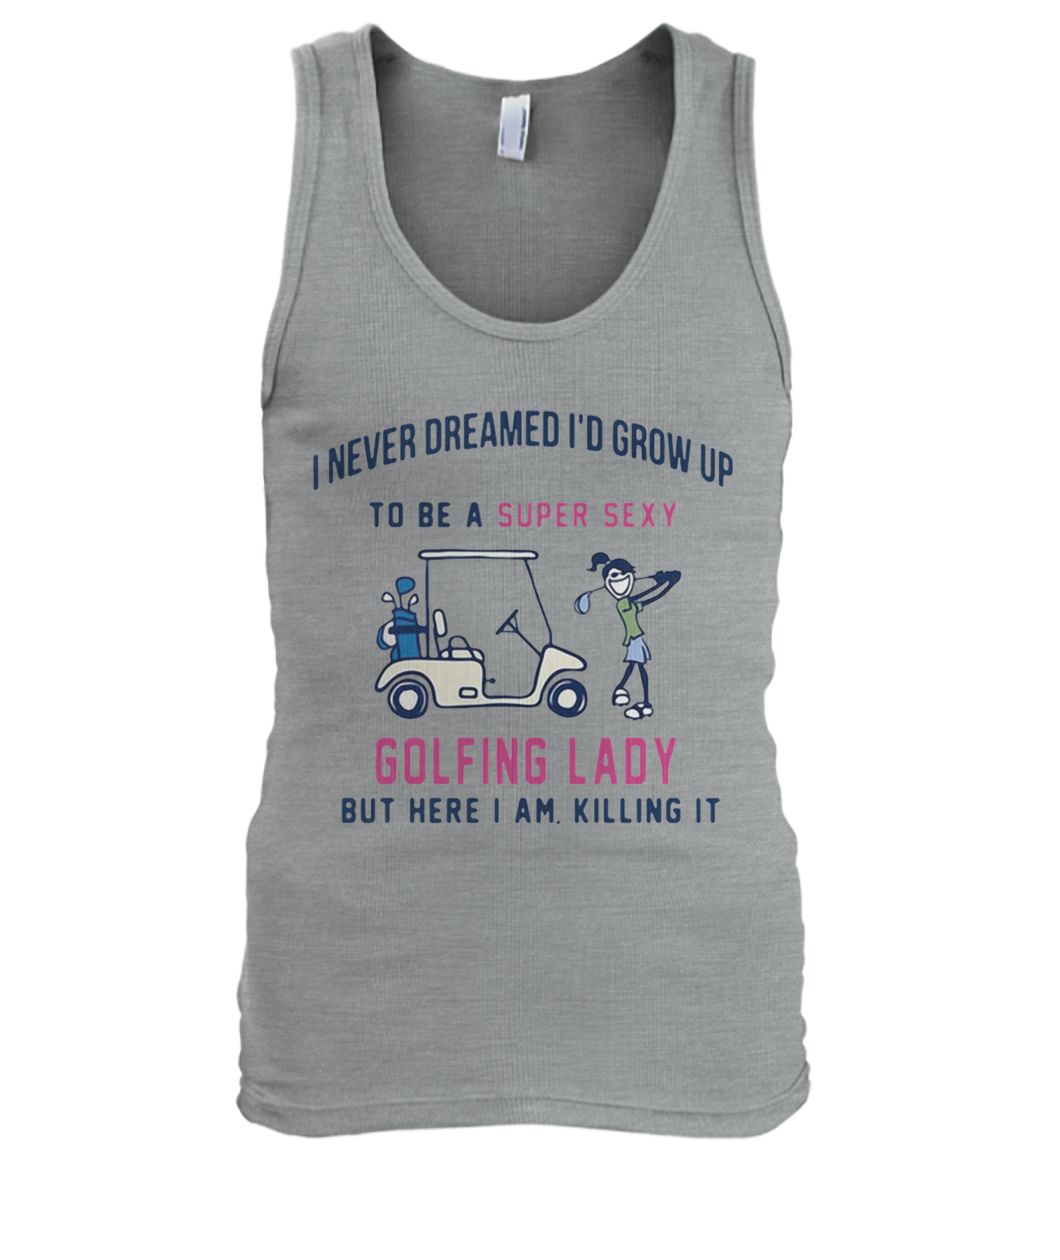 I never dreamed I’d grow up to be a super sexy golfing lady but there I am killing it men's tank top